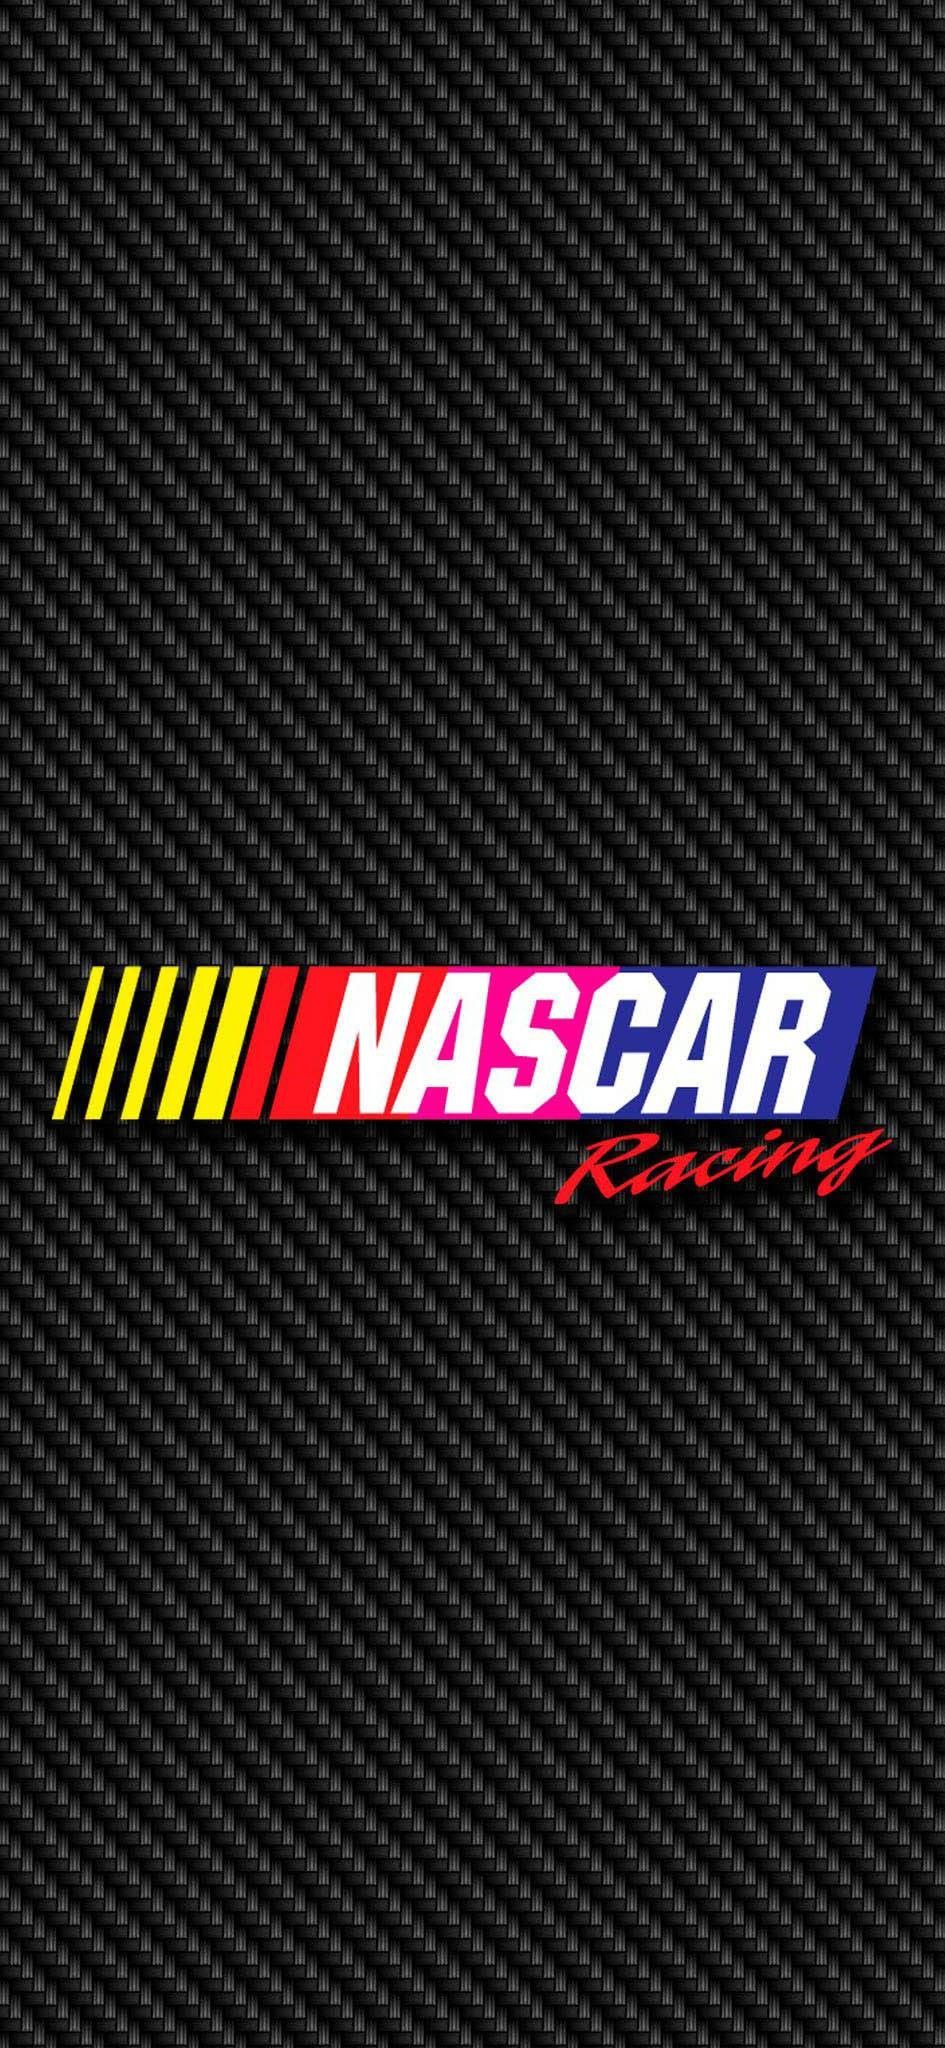 Free download NASCAR wallpaper from Zedge in 2020 Nascar Aesthetic  wallpapers [945x2048] for your Desktop, Mobile & Tablet | Explore 36+  Nascar 2020 Wallpapers | Nascar Wallpaper, Free Nascar Wallpaper, Nascar  Wallpapers